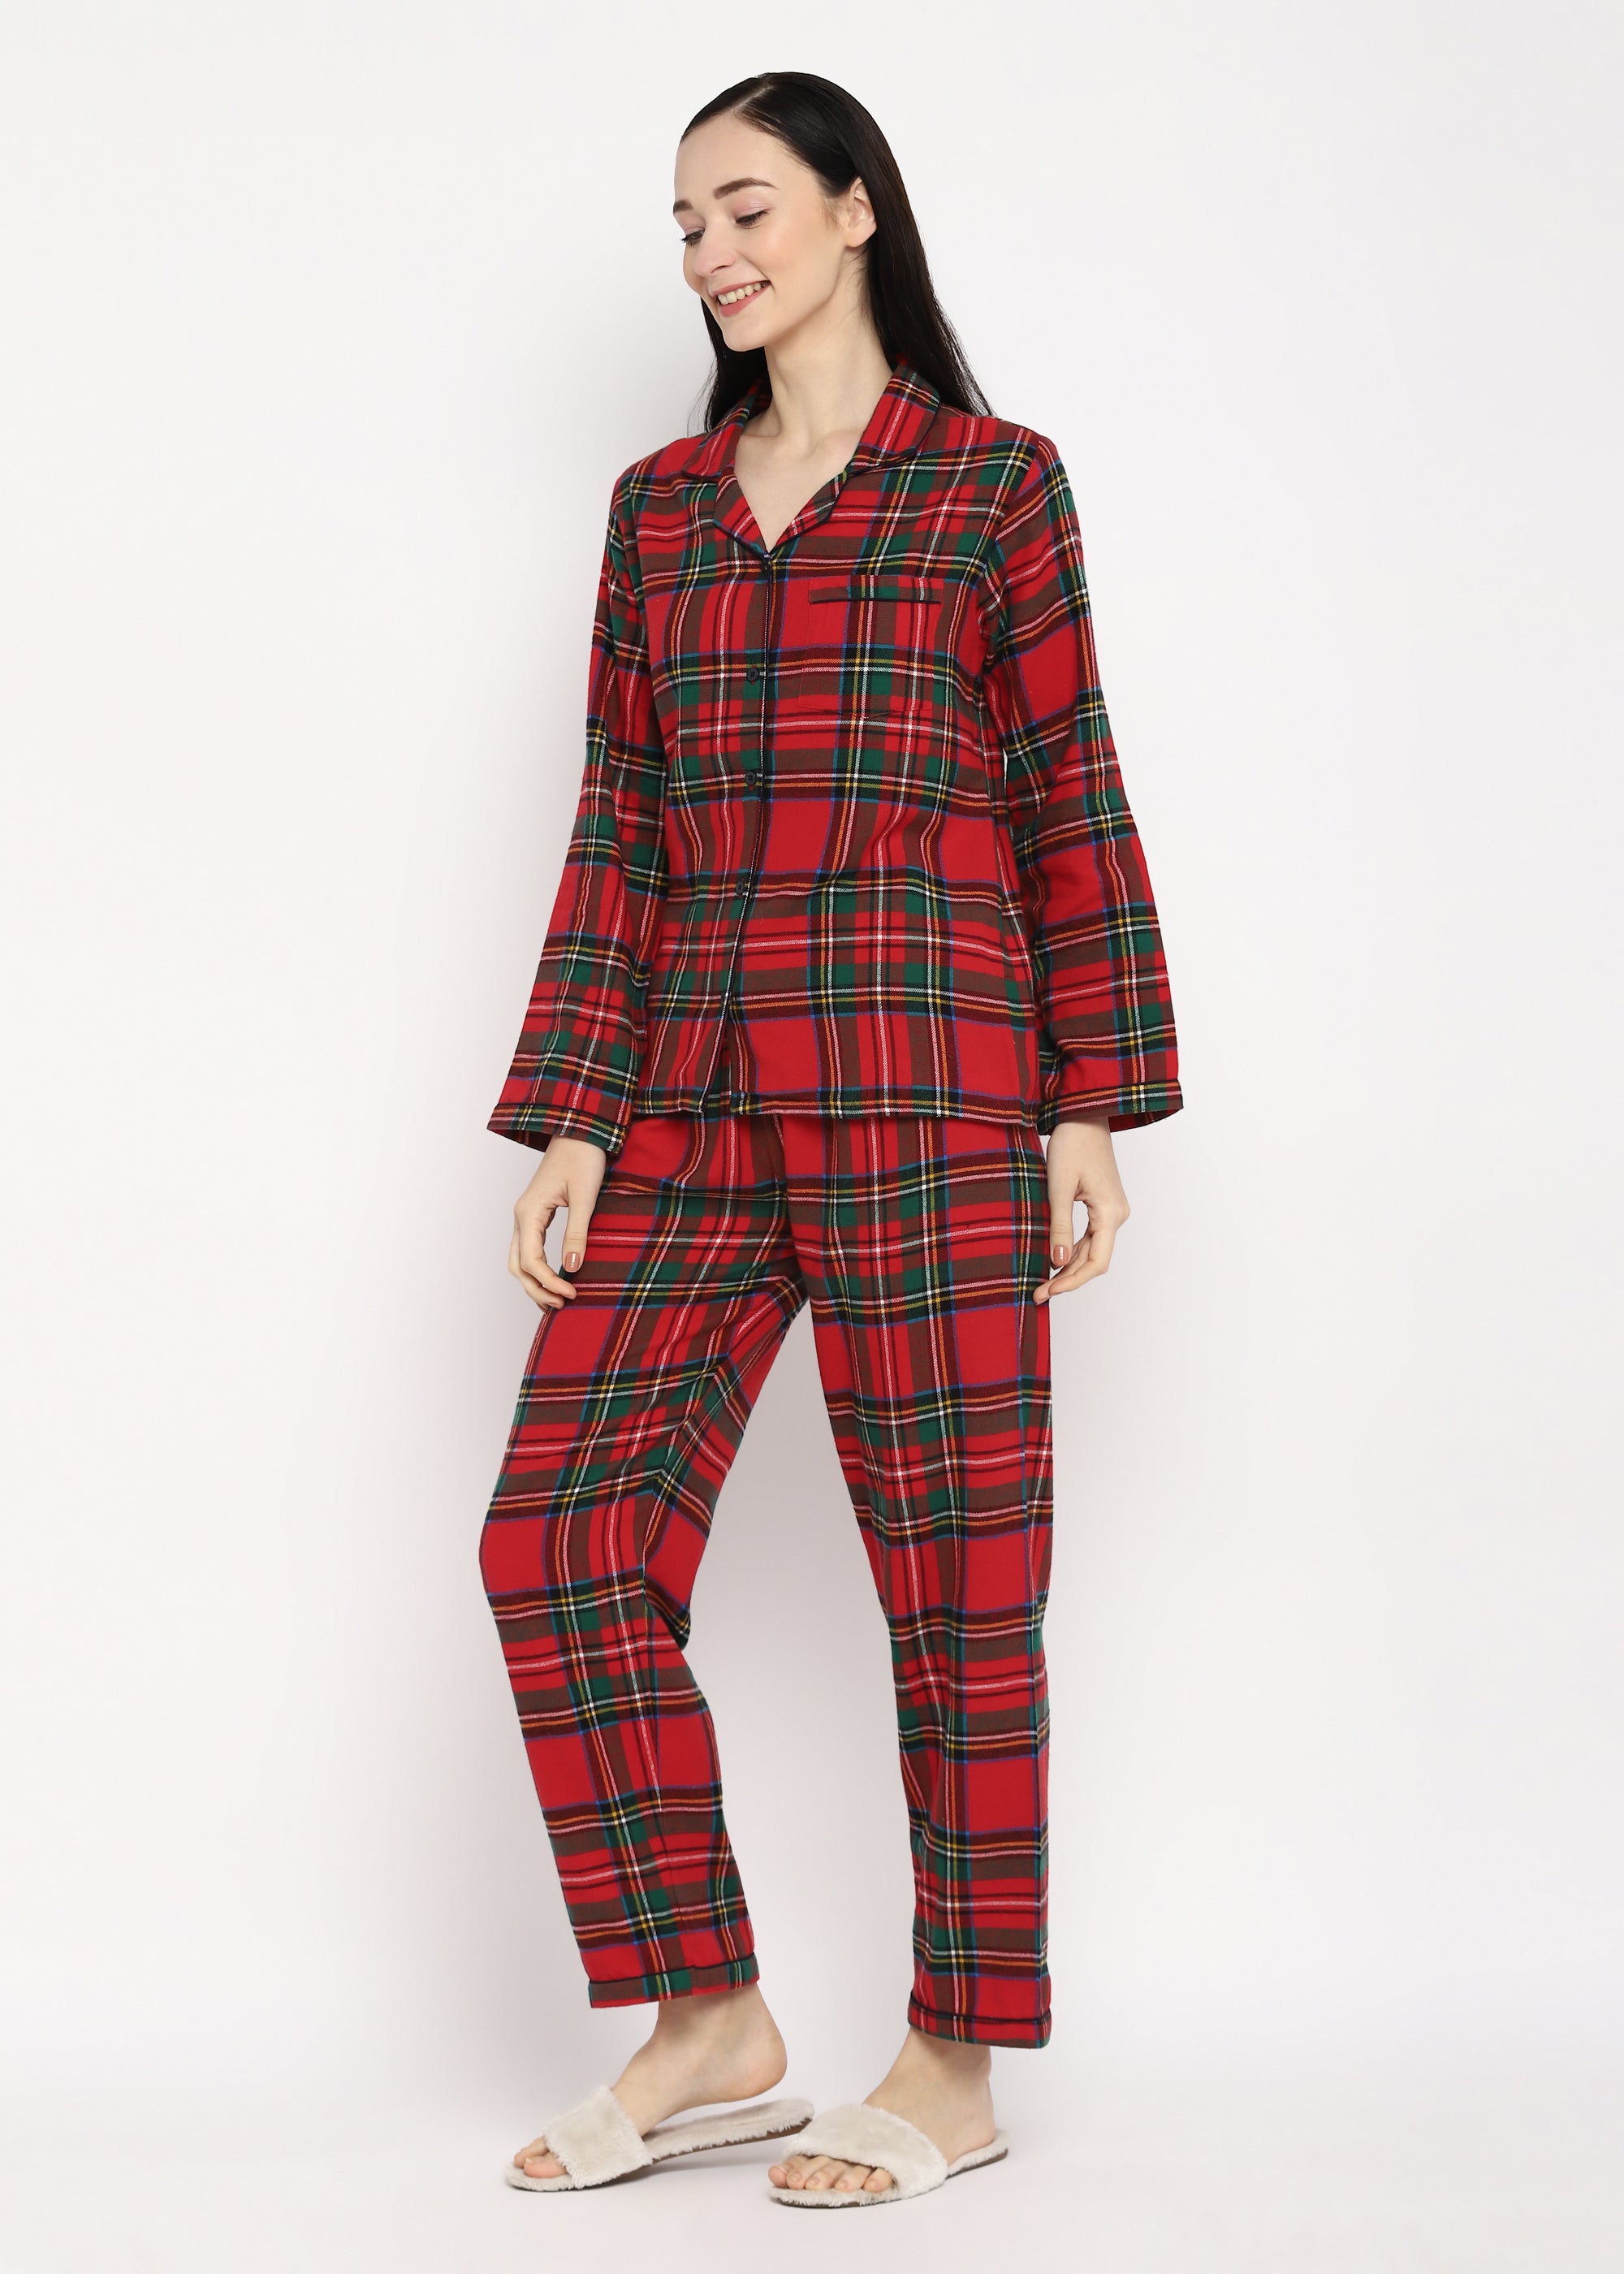 Green & White Checked Print Cotton Flannel Long Sleeve Women's Night Suit - Shopbloom